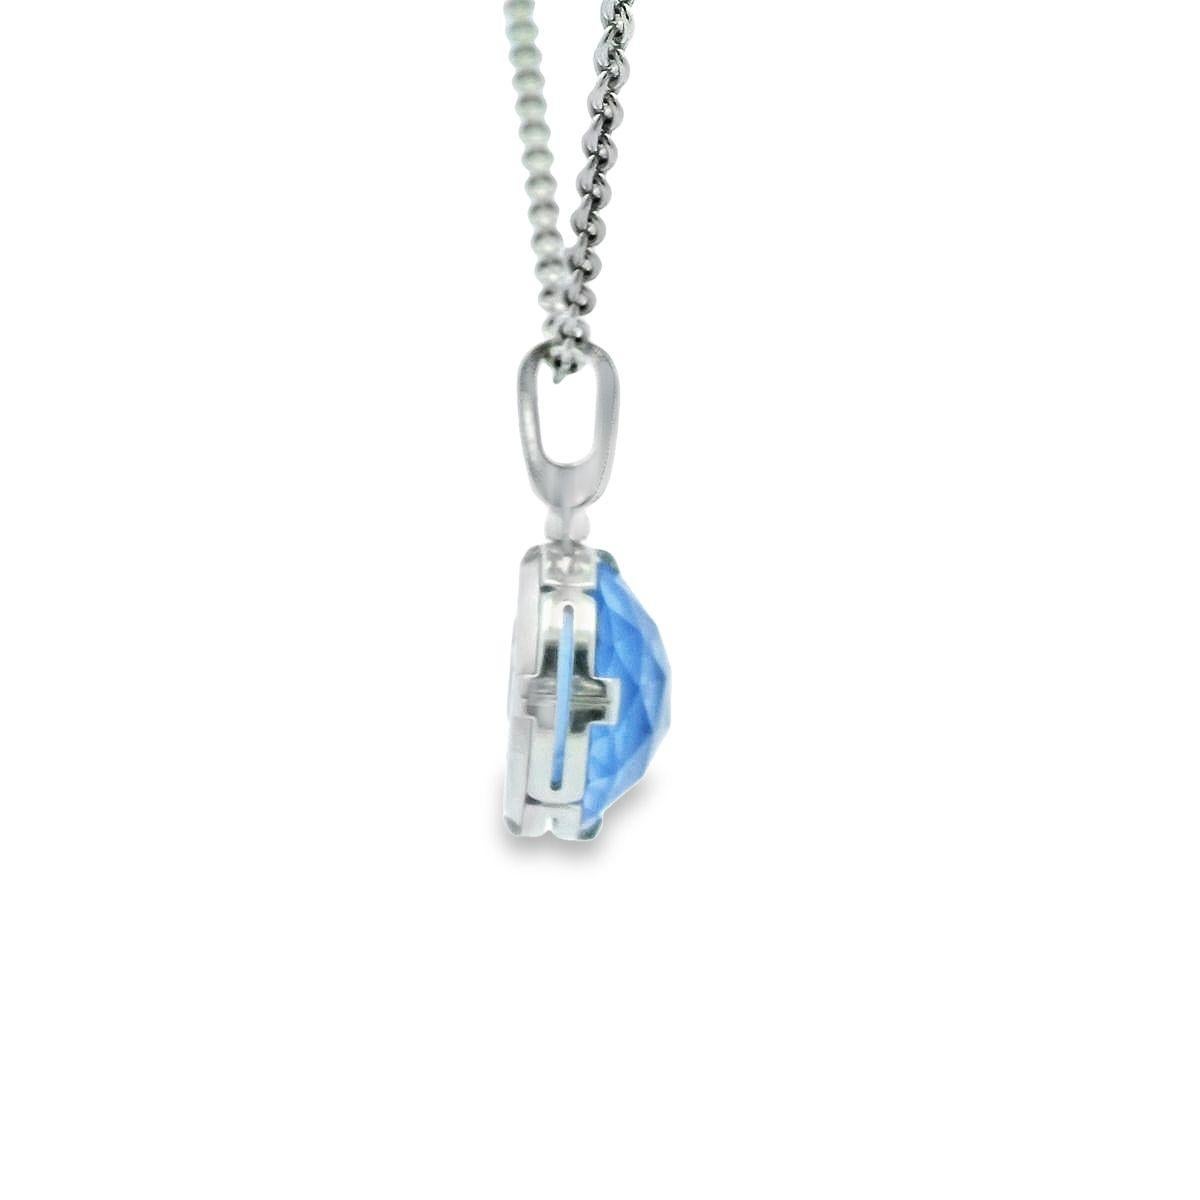 This timeless pendant from the Parentesi Cocktail Collection from BVLGARI is offered by Alex & Co. This 18K white gold classic piece delivers a modern attitude and features a striking round faceted checkerboard cut blue topaz weighing 9.60ct,